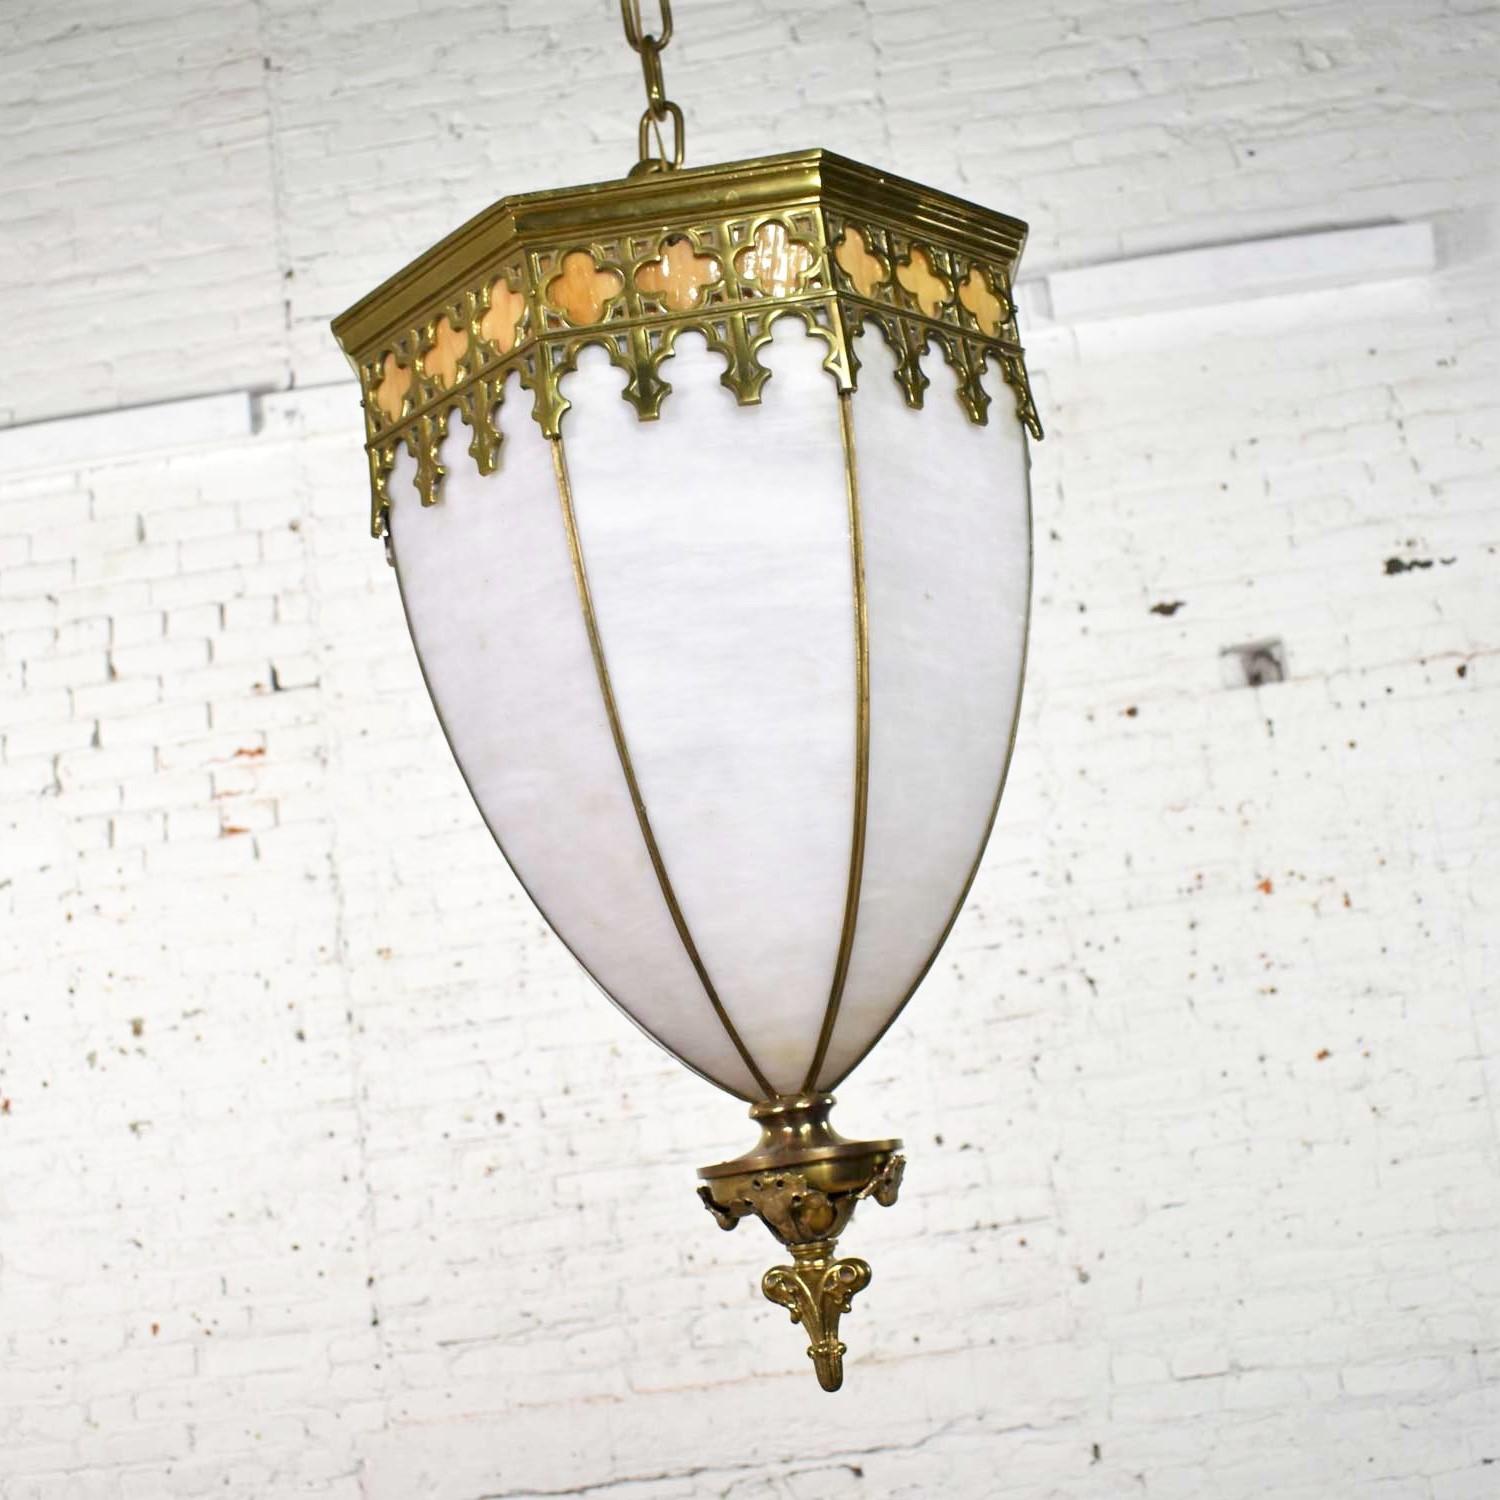 Fabulous antique octagon chandelier pendant light in a Gothic style and comprised of slag glass and brass with the appearance of an inverted polyhedral dome. We have two of these available but have priced them separately. They are both in wonderful